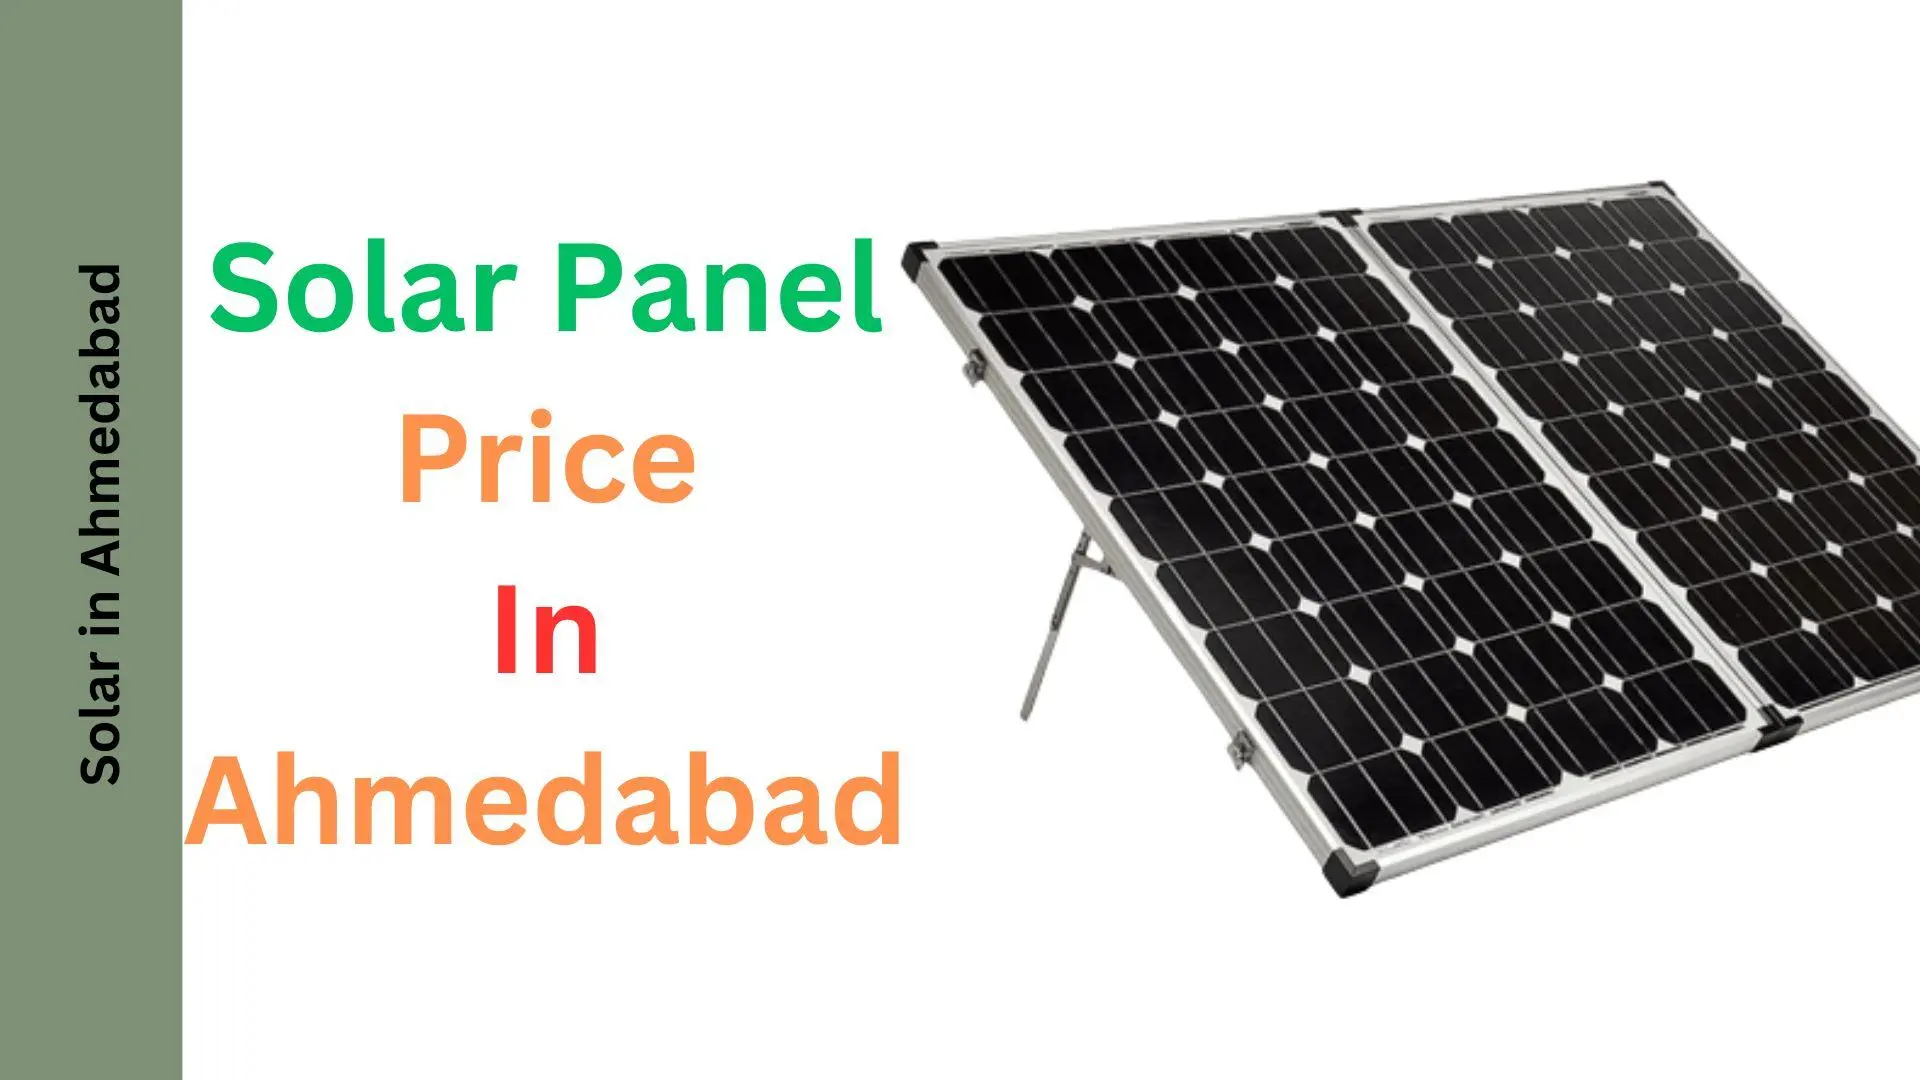 2kw solar panel price in gujarat - What is the price of 1kW solar panel in Gujarat